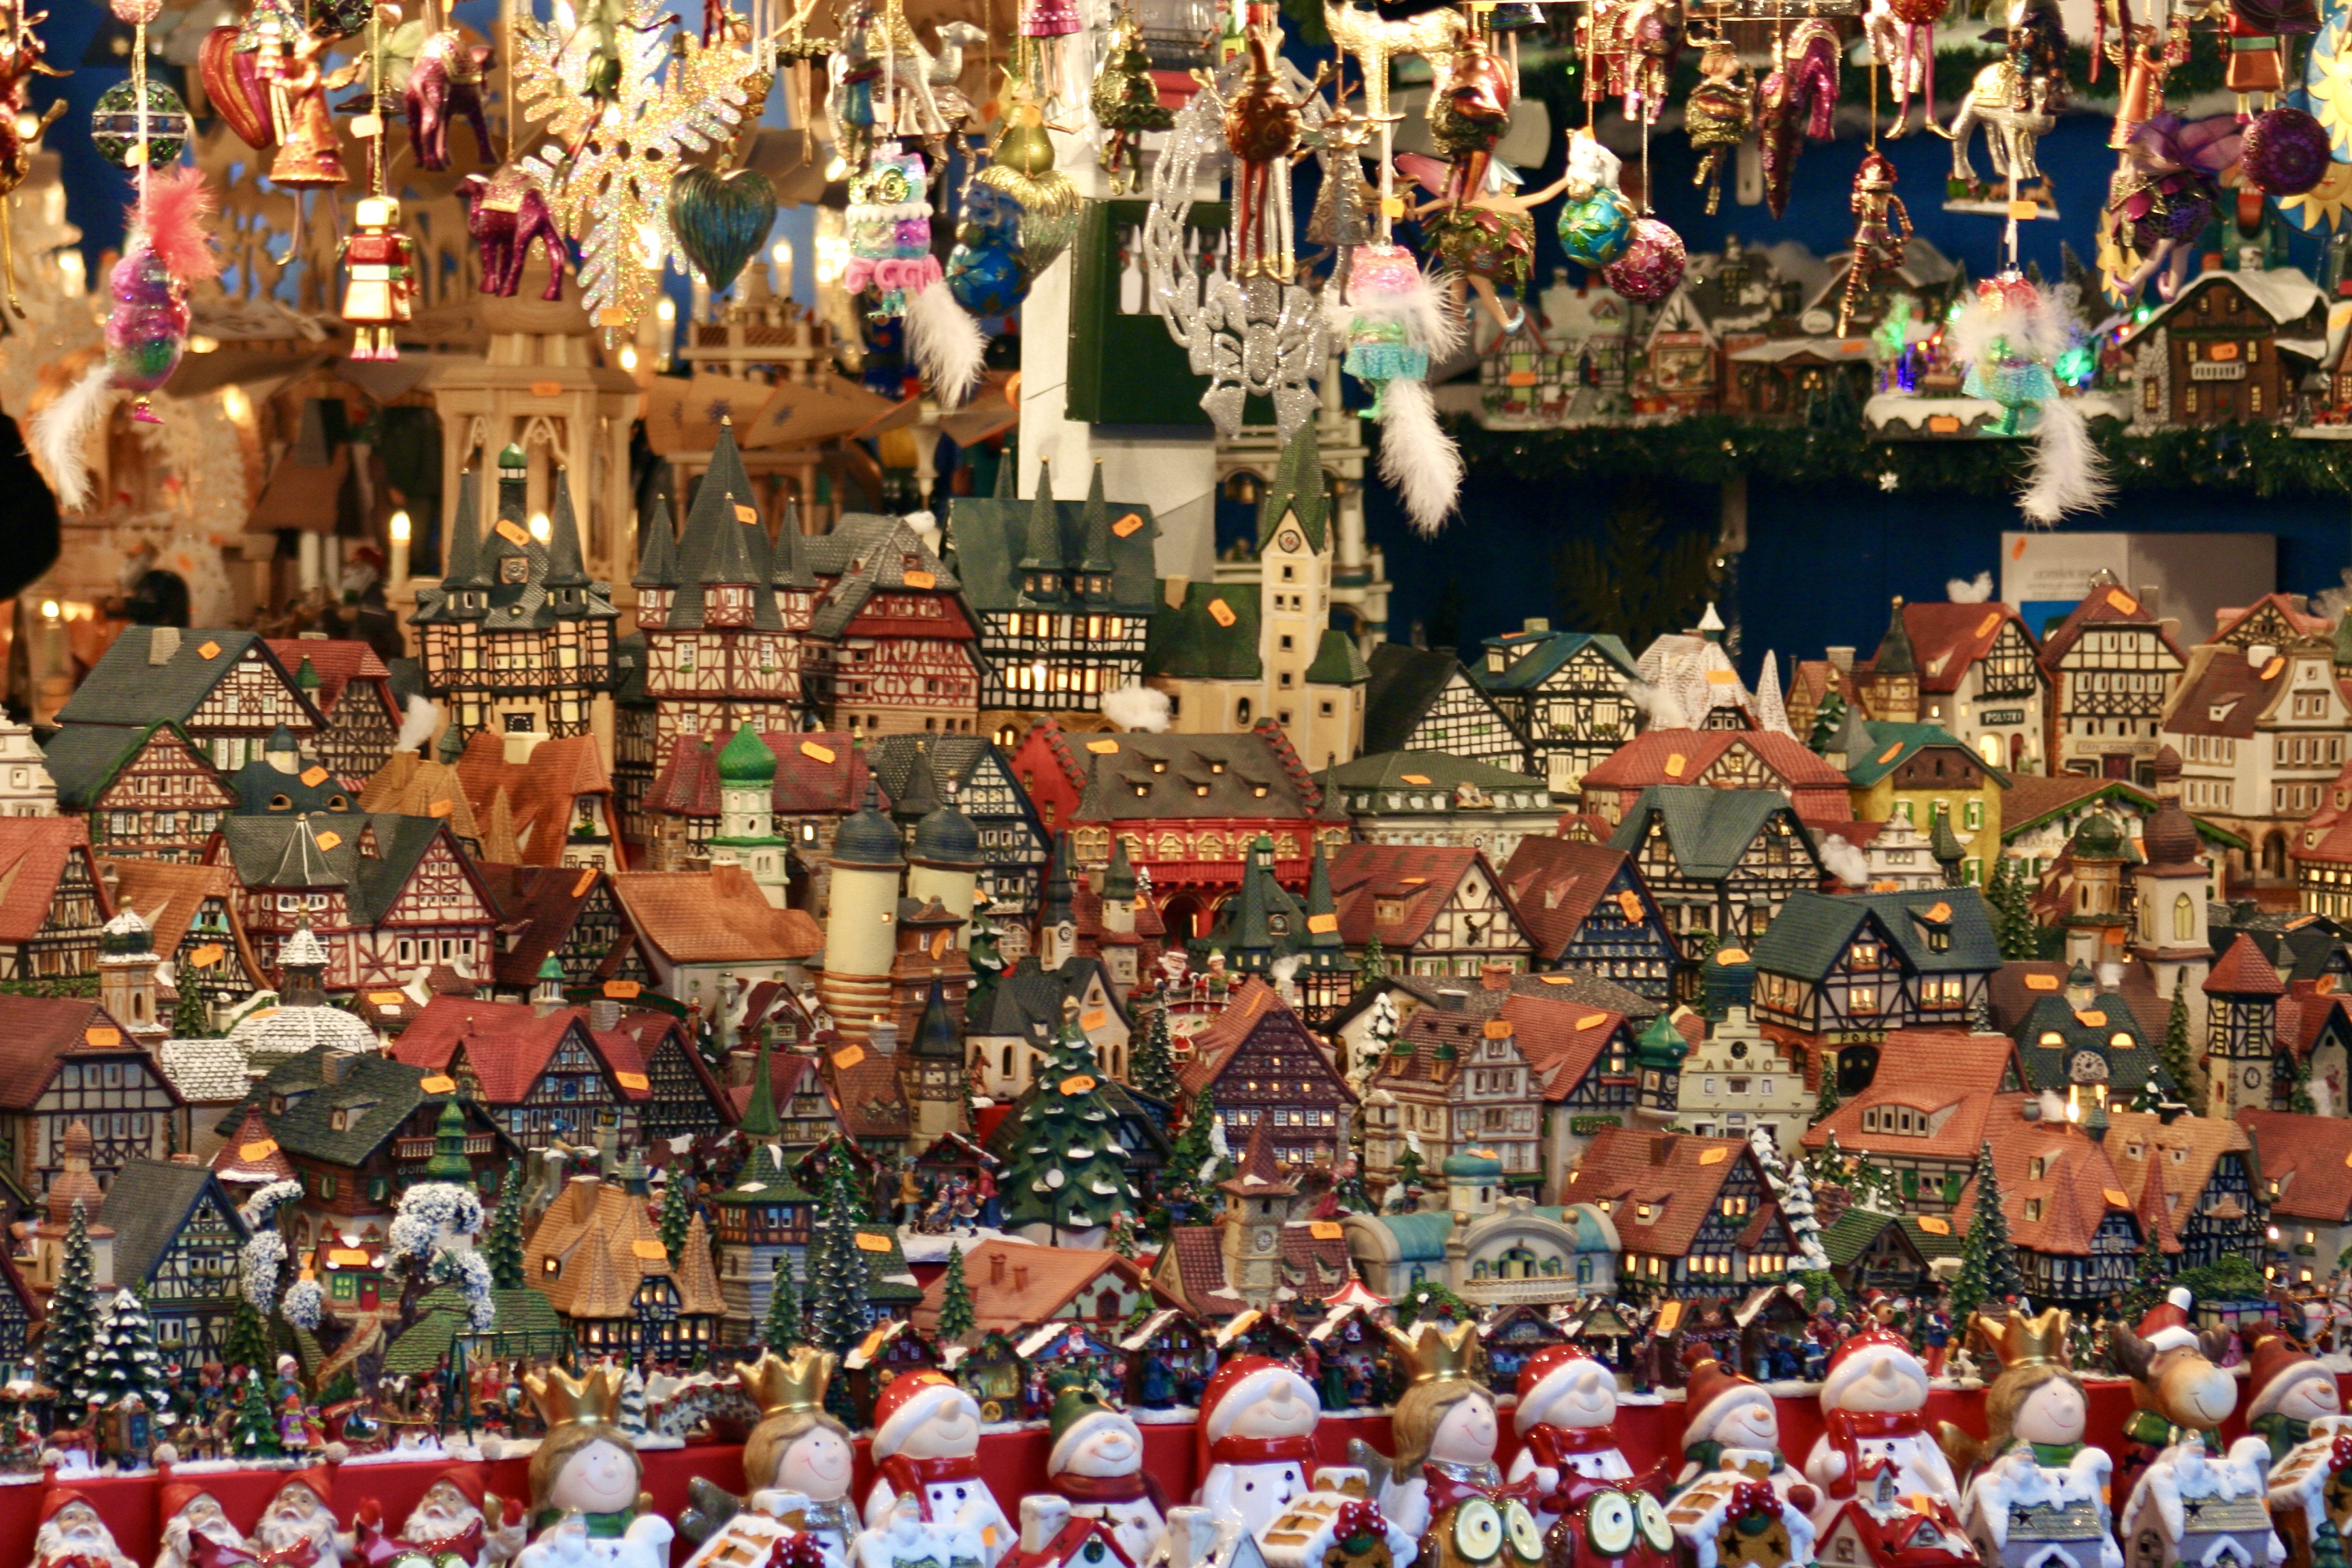 Ornaments and decorations at a German Christmas Market